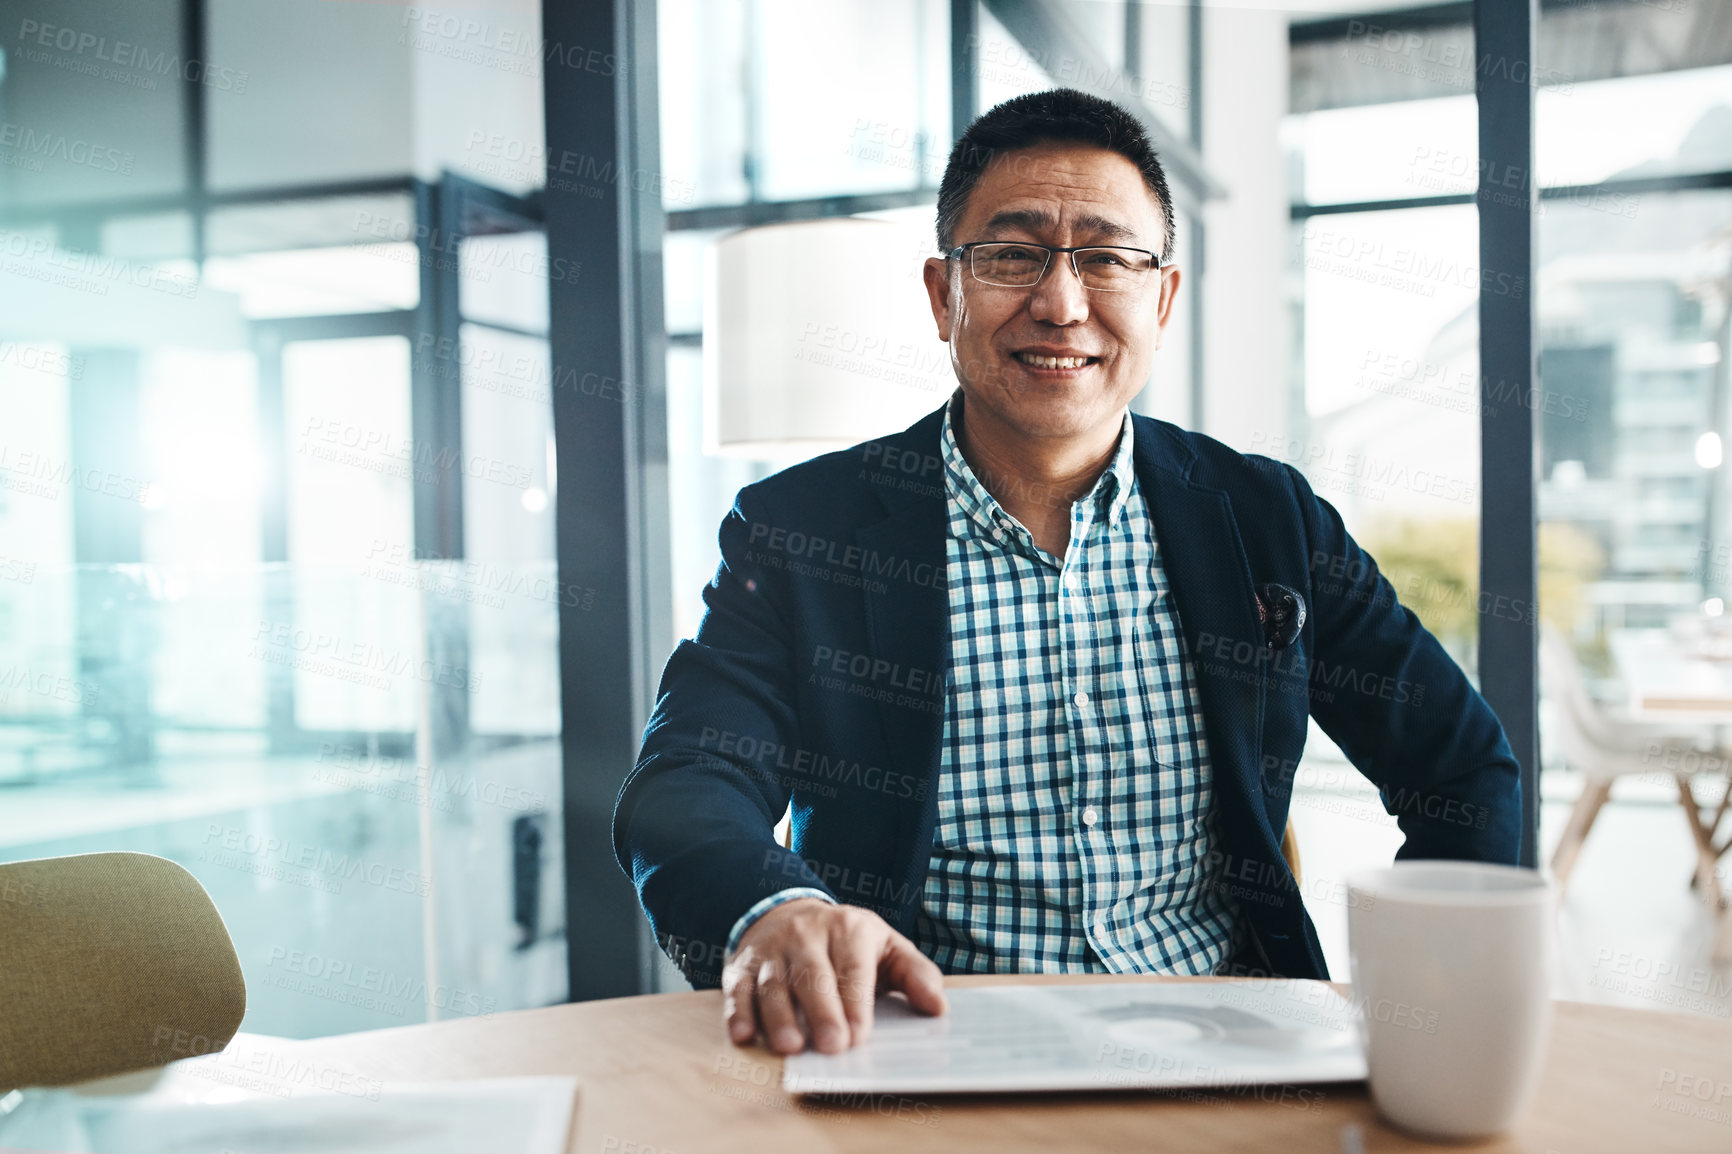 Buy stock photo Portrait, tablet and data with a business man in the office, sitting at a desk for planning or research. Happy, mindset and professional with a mature asian male manager working on his company vision